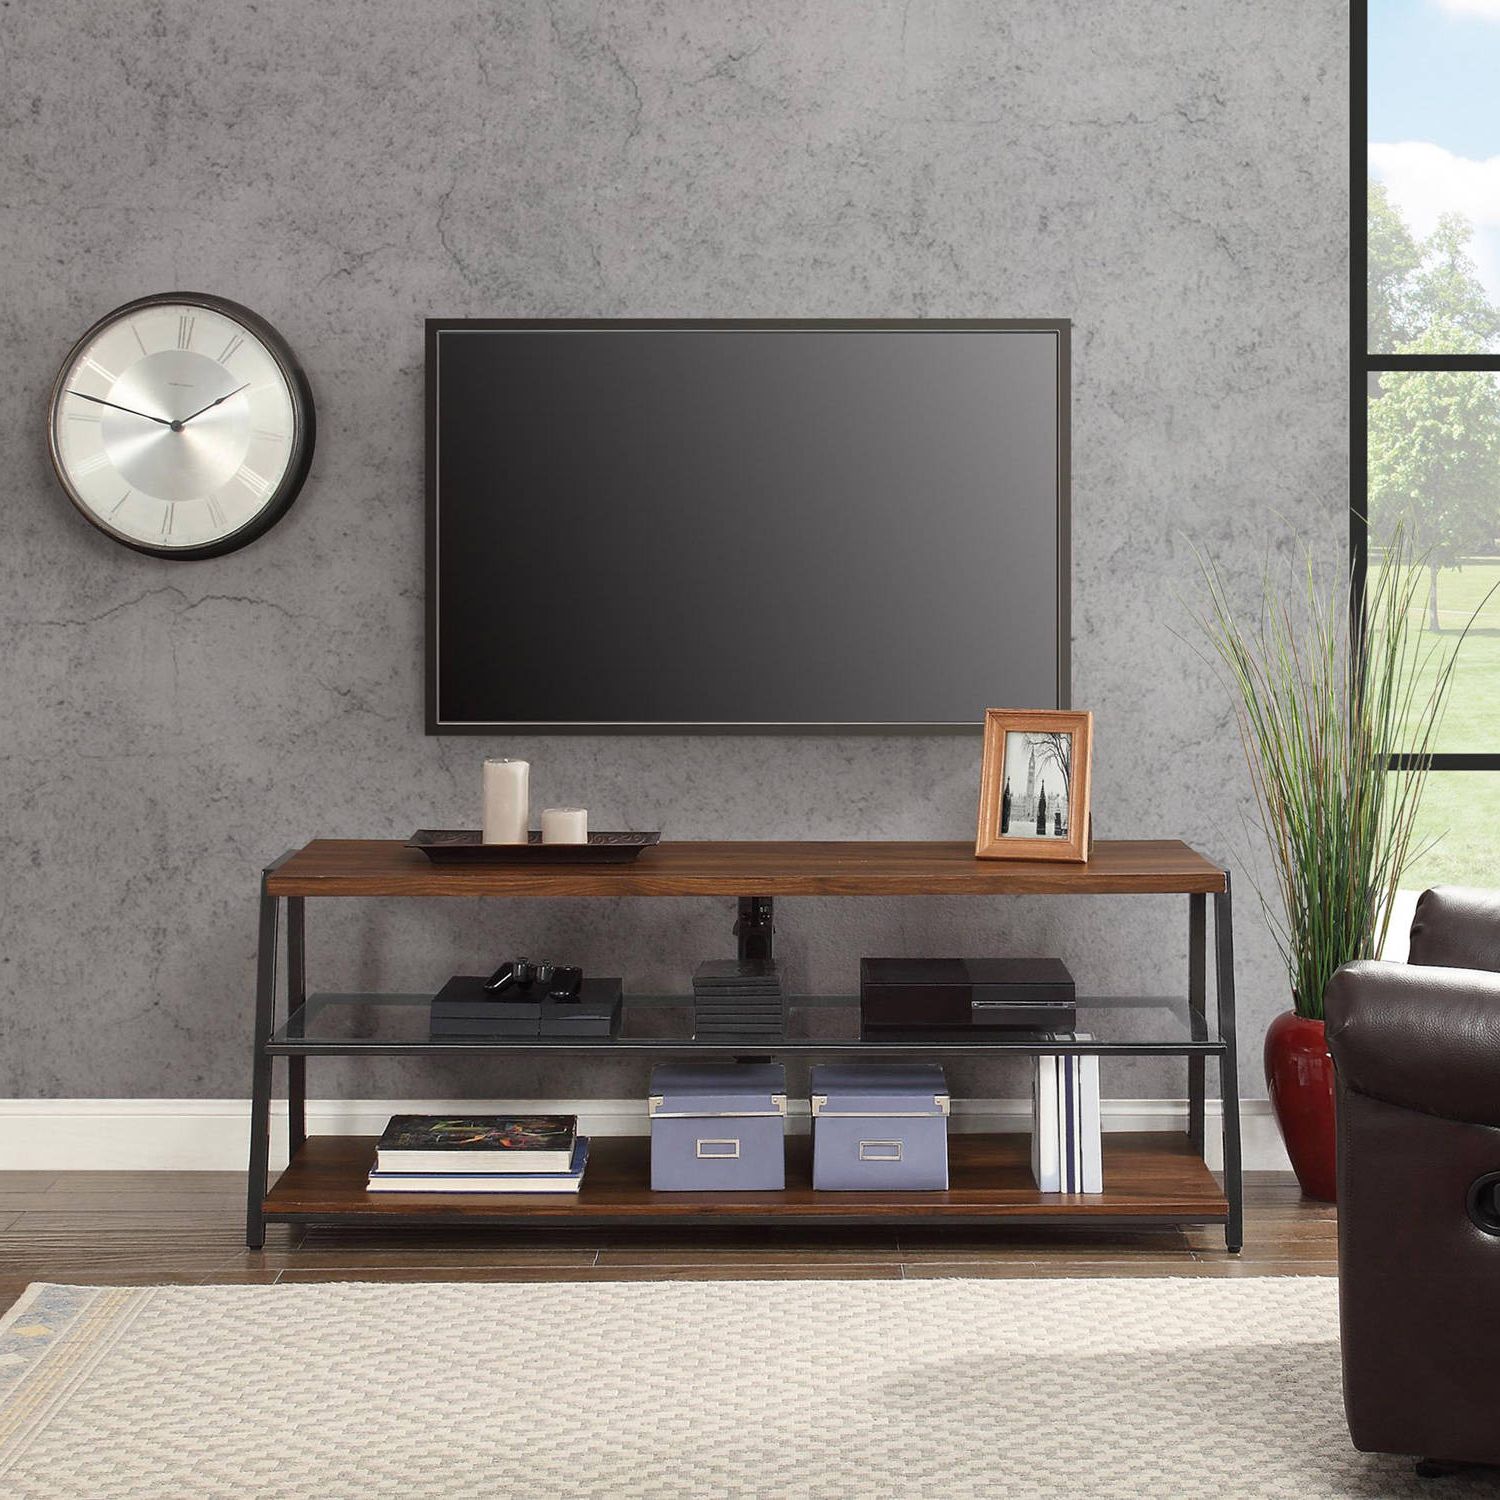 Mainstays Arris 3 In 1 Tv Stand For Televisions Up To 70 With Mainstays Arris 3 In 1 Tv Stands In Canyon Walnut Finish (View 4 of 20)